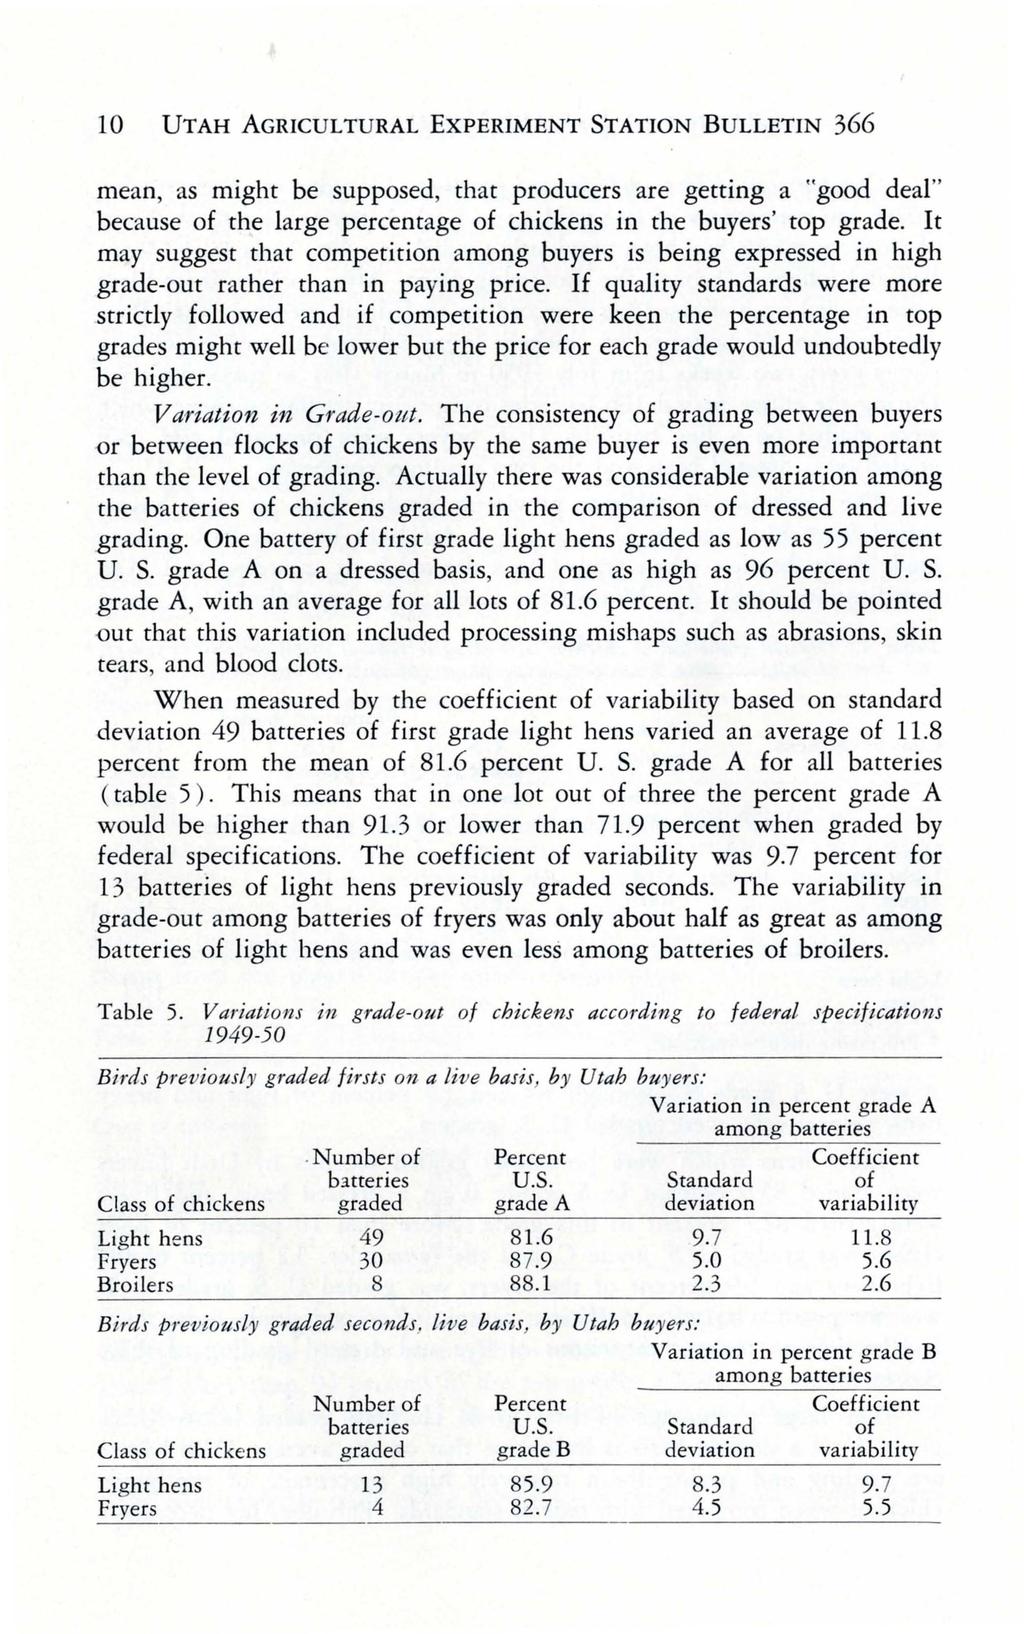 10 UTAH AGRICULTURAL EXPERIMENT STATION BULLETIN 366 mean, as might be supposed, that producers are getting a "good deal" because of the large age of chickens in the buyers' top grade.